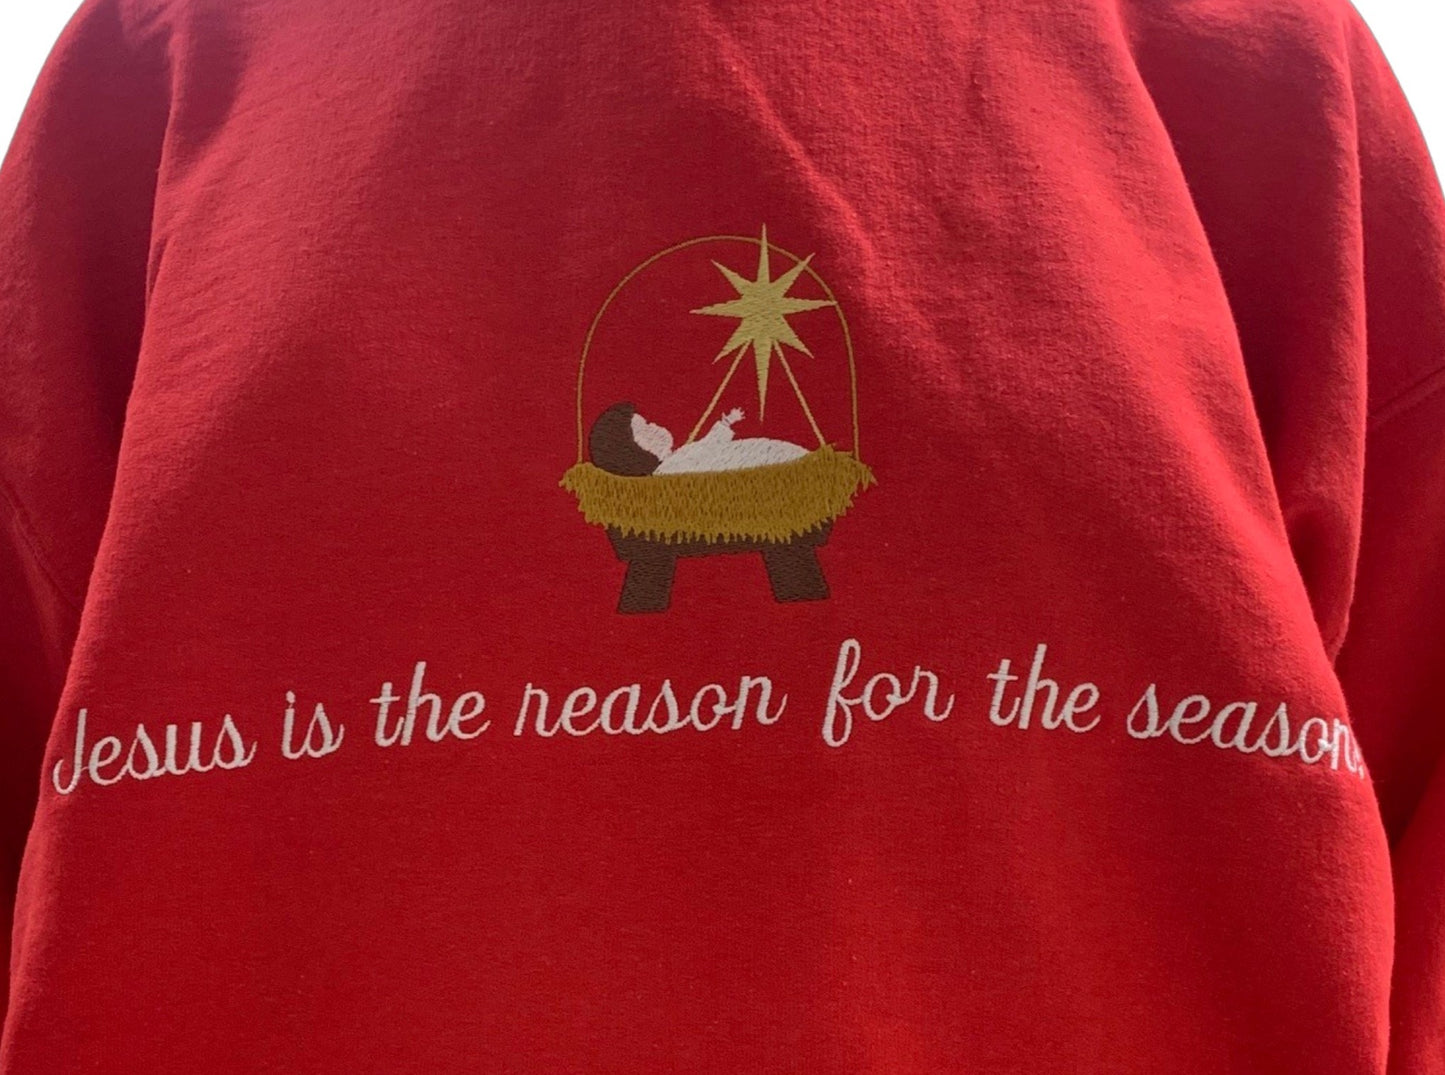 "Jesus is the Reason for the Season" Embroidered Crewneck Sweater by SCTJM